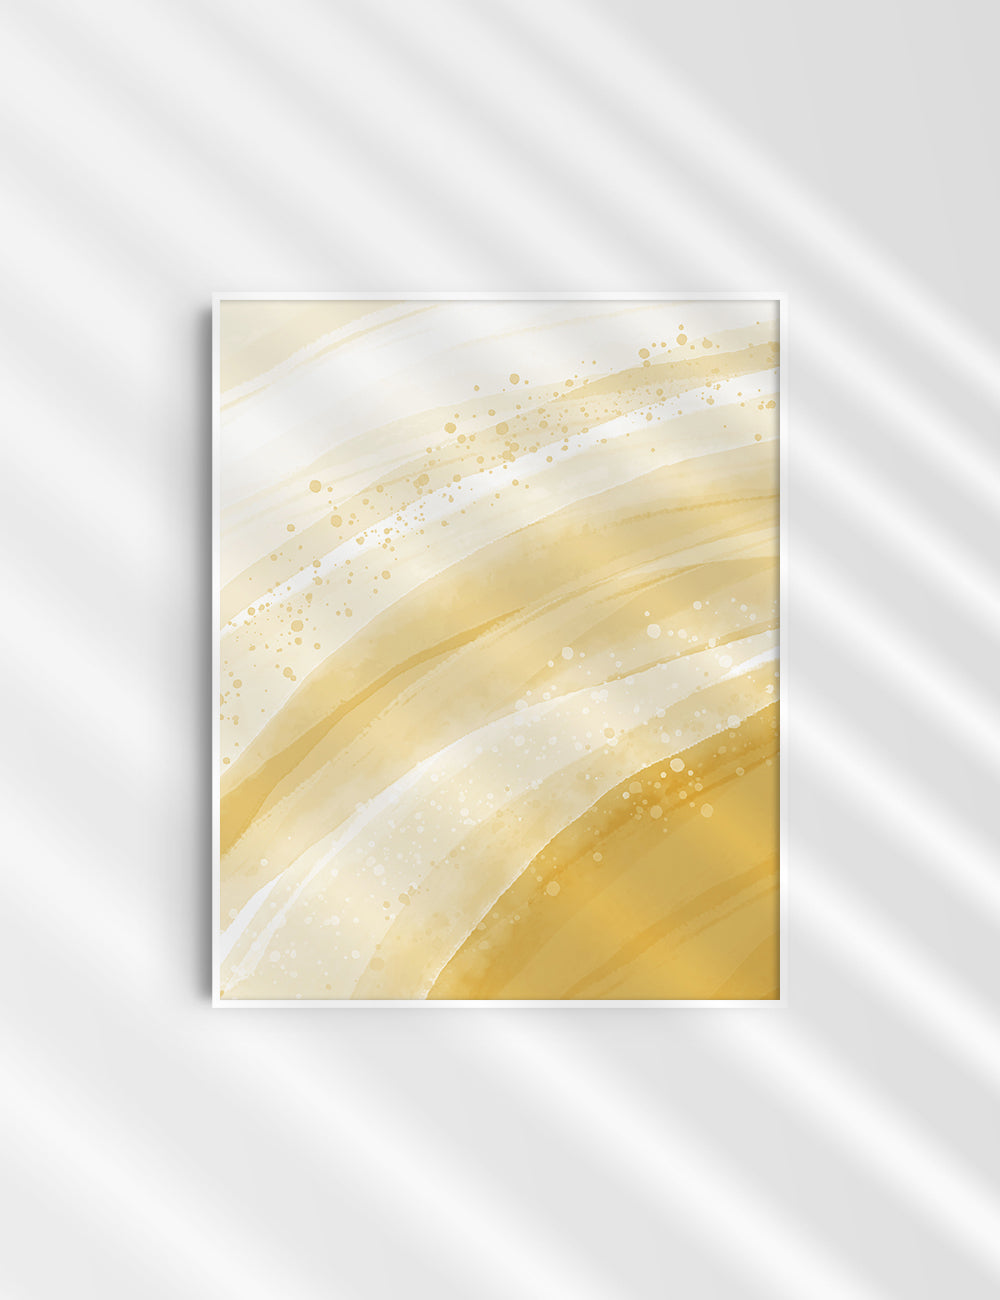 WATERCOLOR ABSTRACT. Yellow Aesthetic. Abstract Watercolor Painting. Printable Wall Art. - PAPER MOON Art & Design